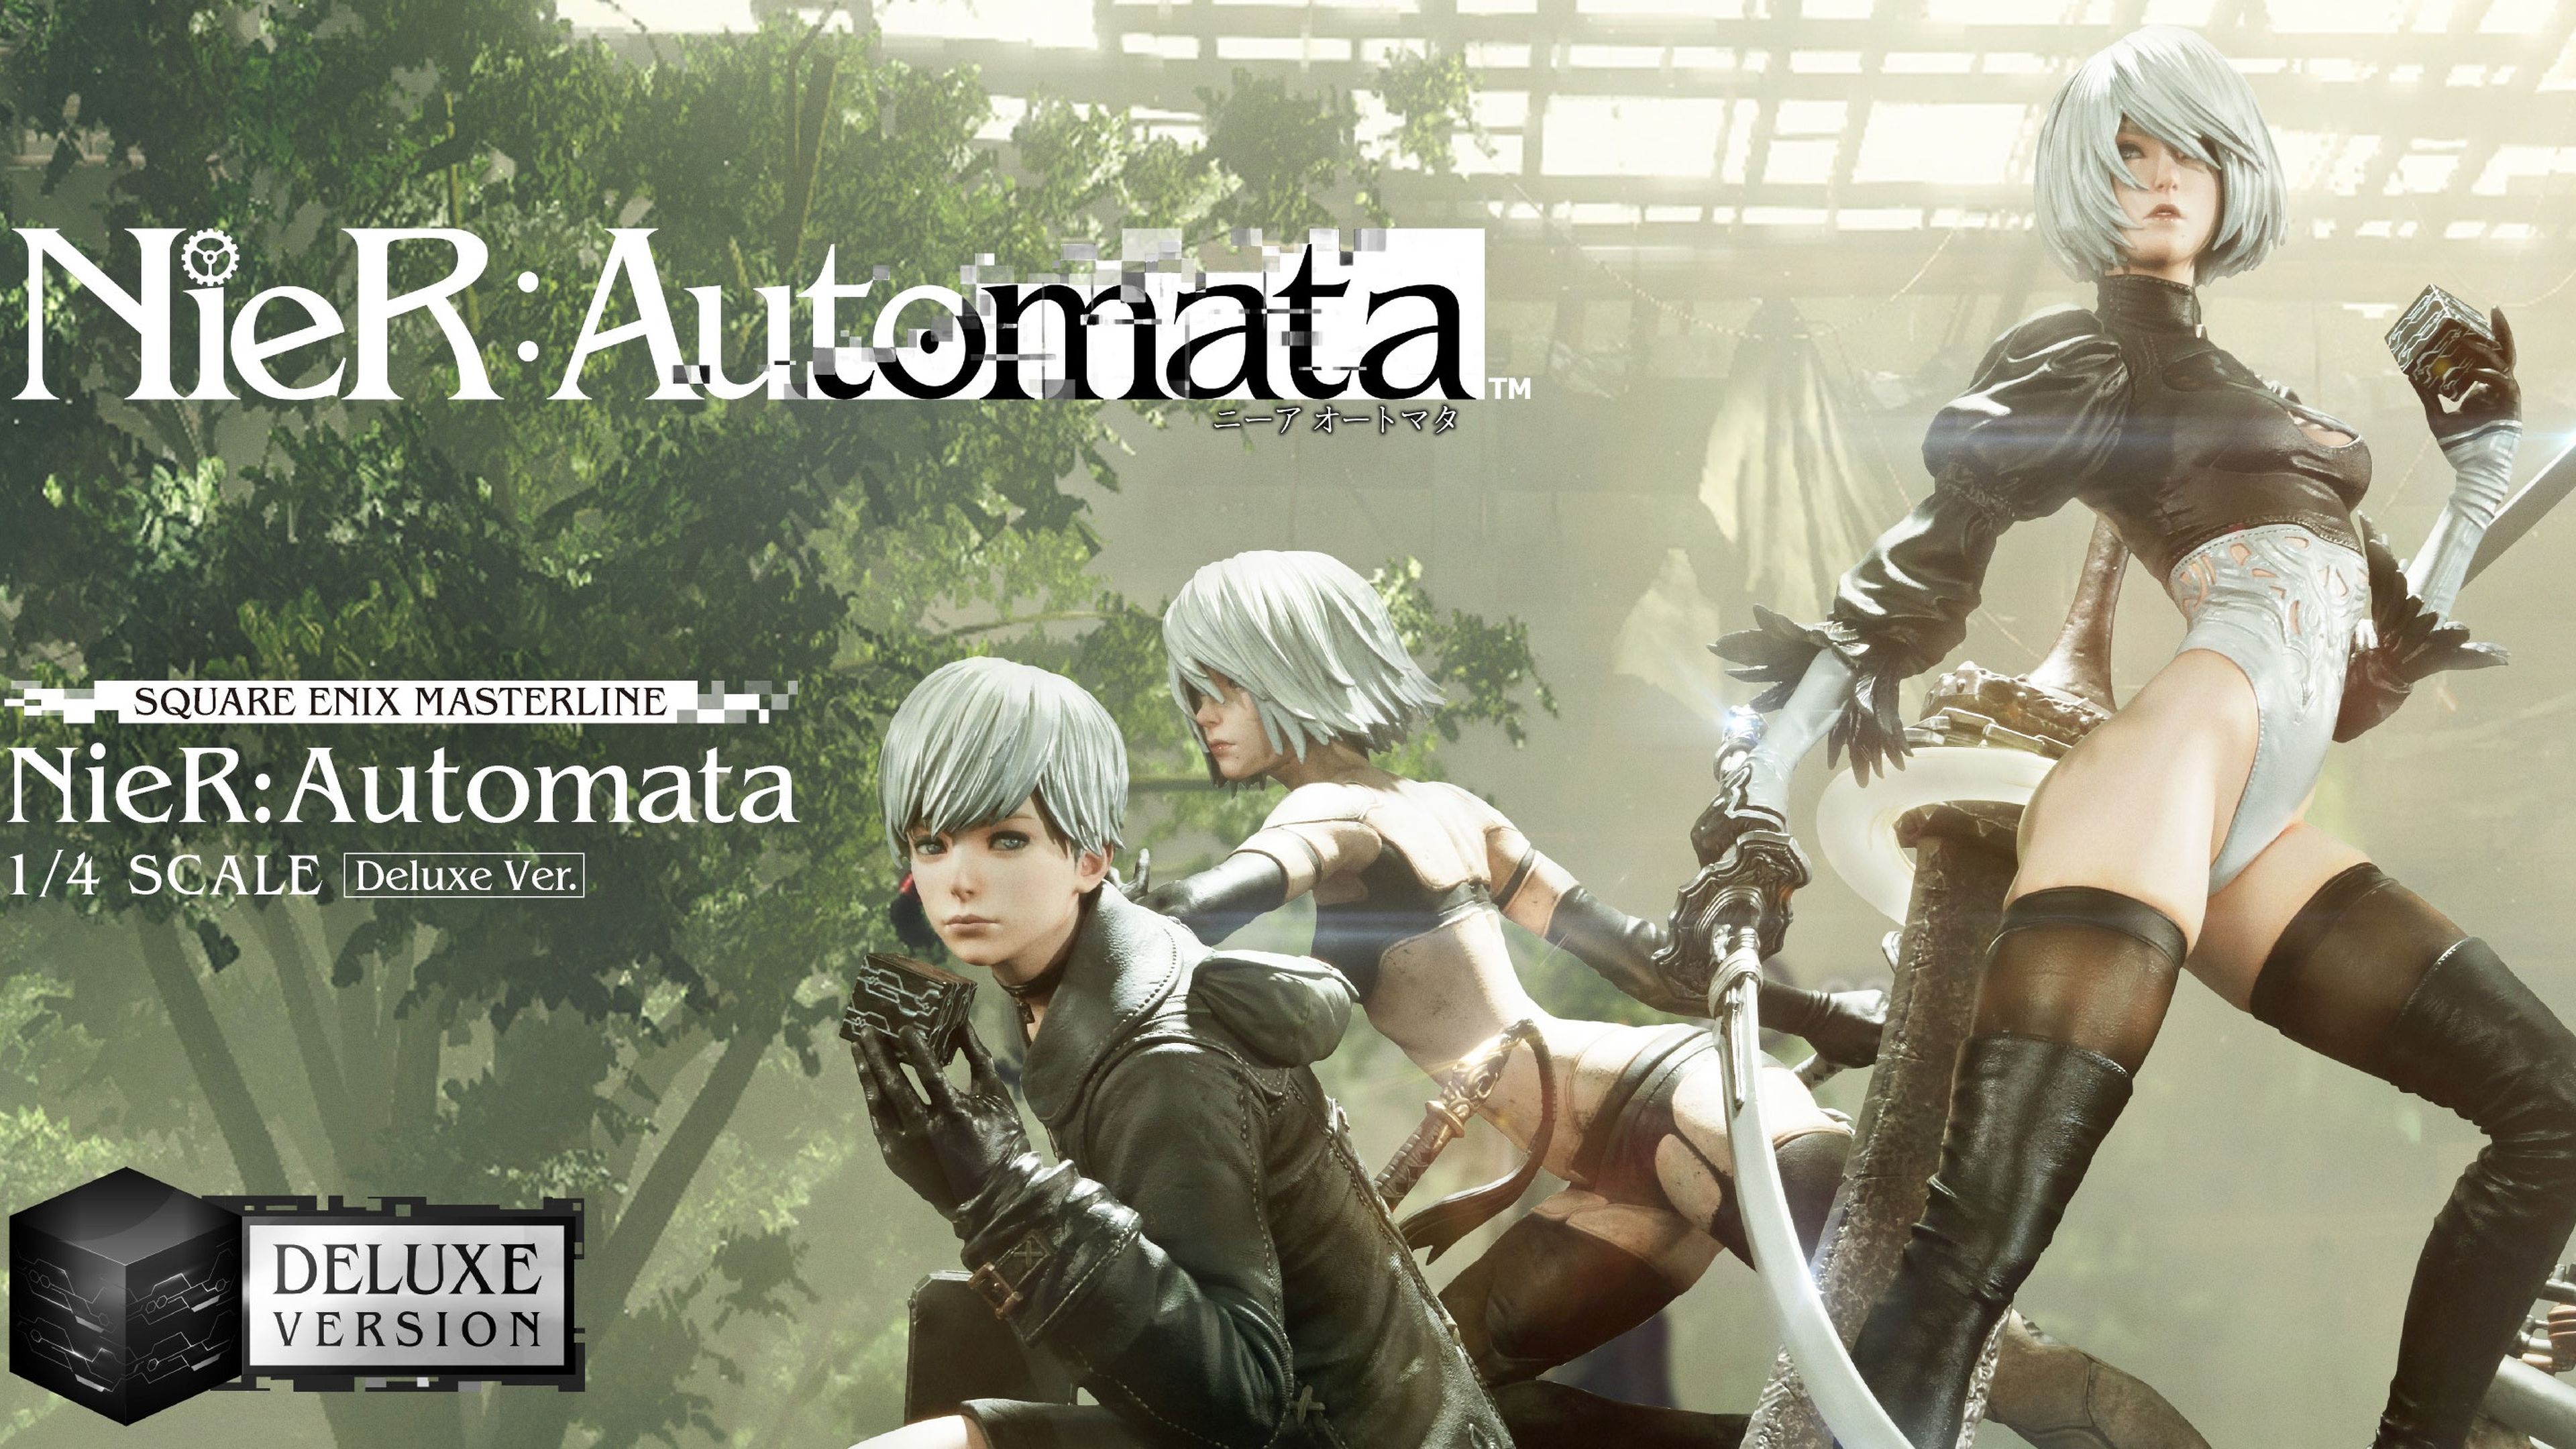 The 8 best NieR Automata figures: Price, design and everything you need to know